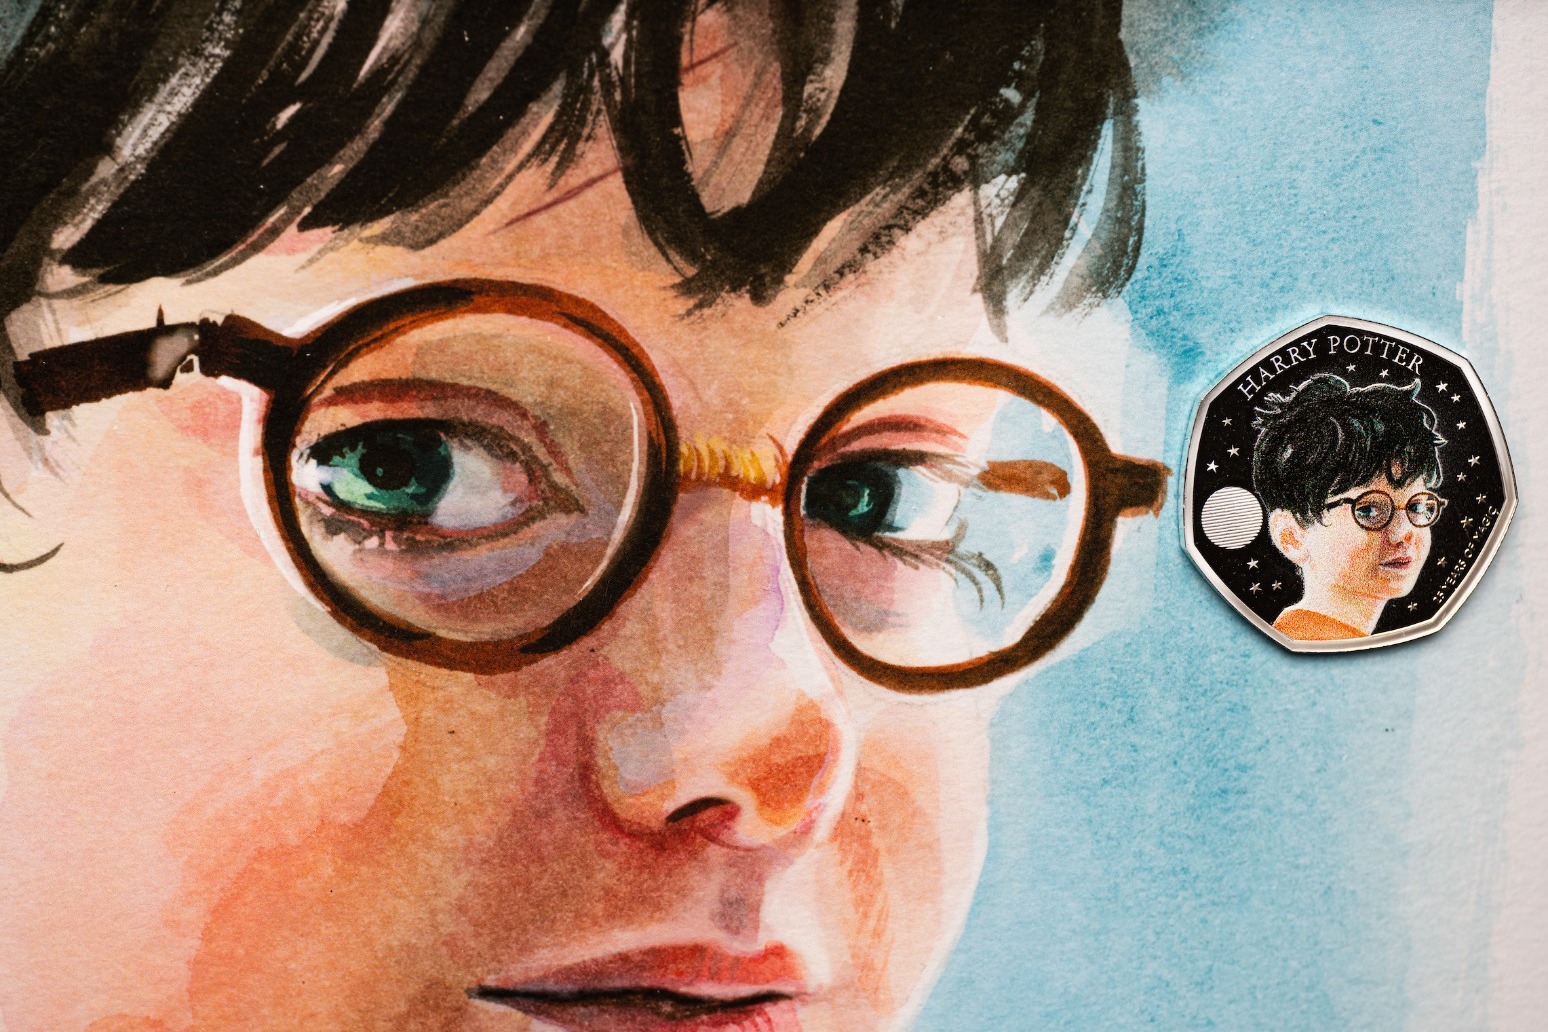 New Harry Potter coins to feature portraits of the King and Queen Elizabeth II 